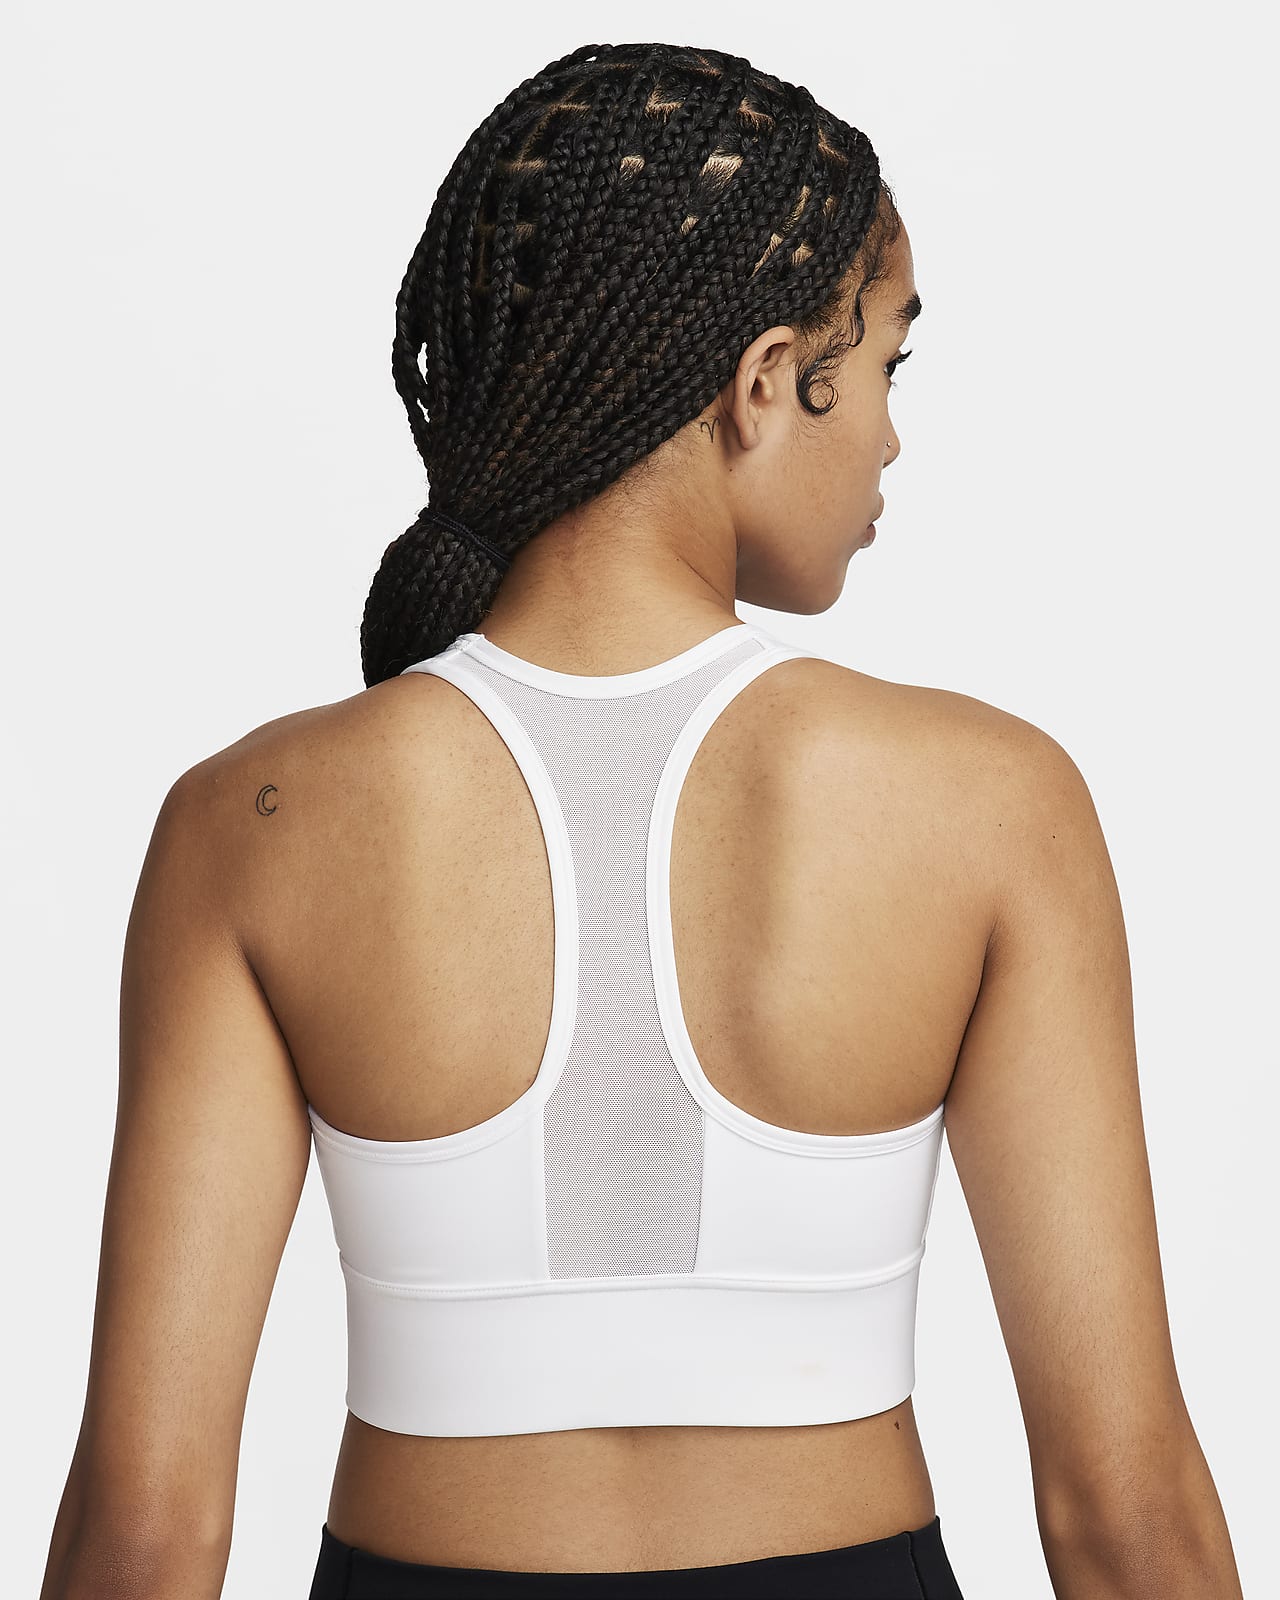 It's back Bellas! Our high impact sports bra with a sleek